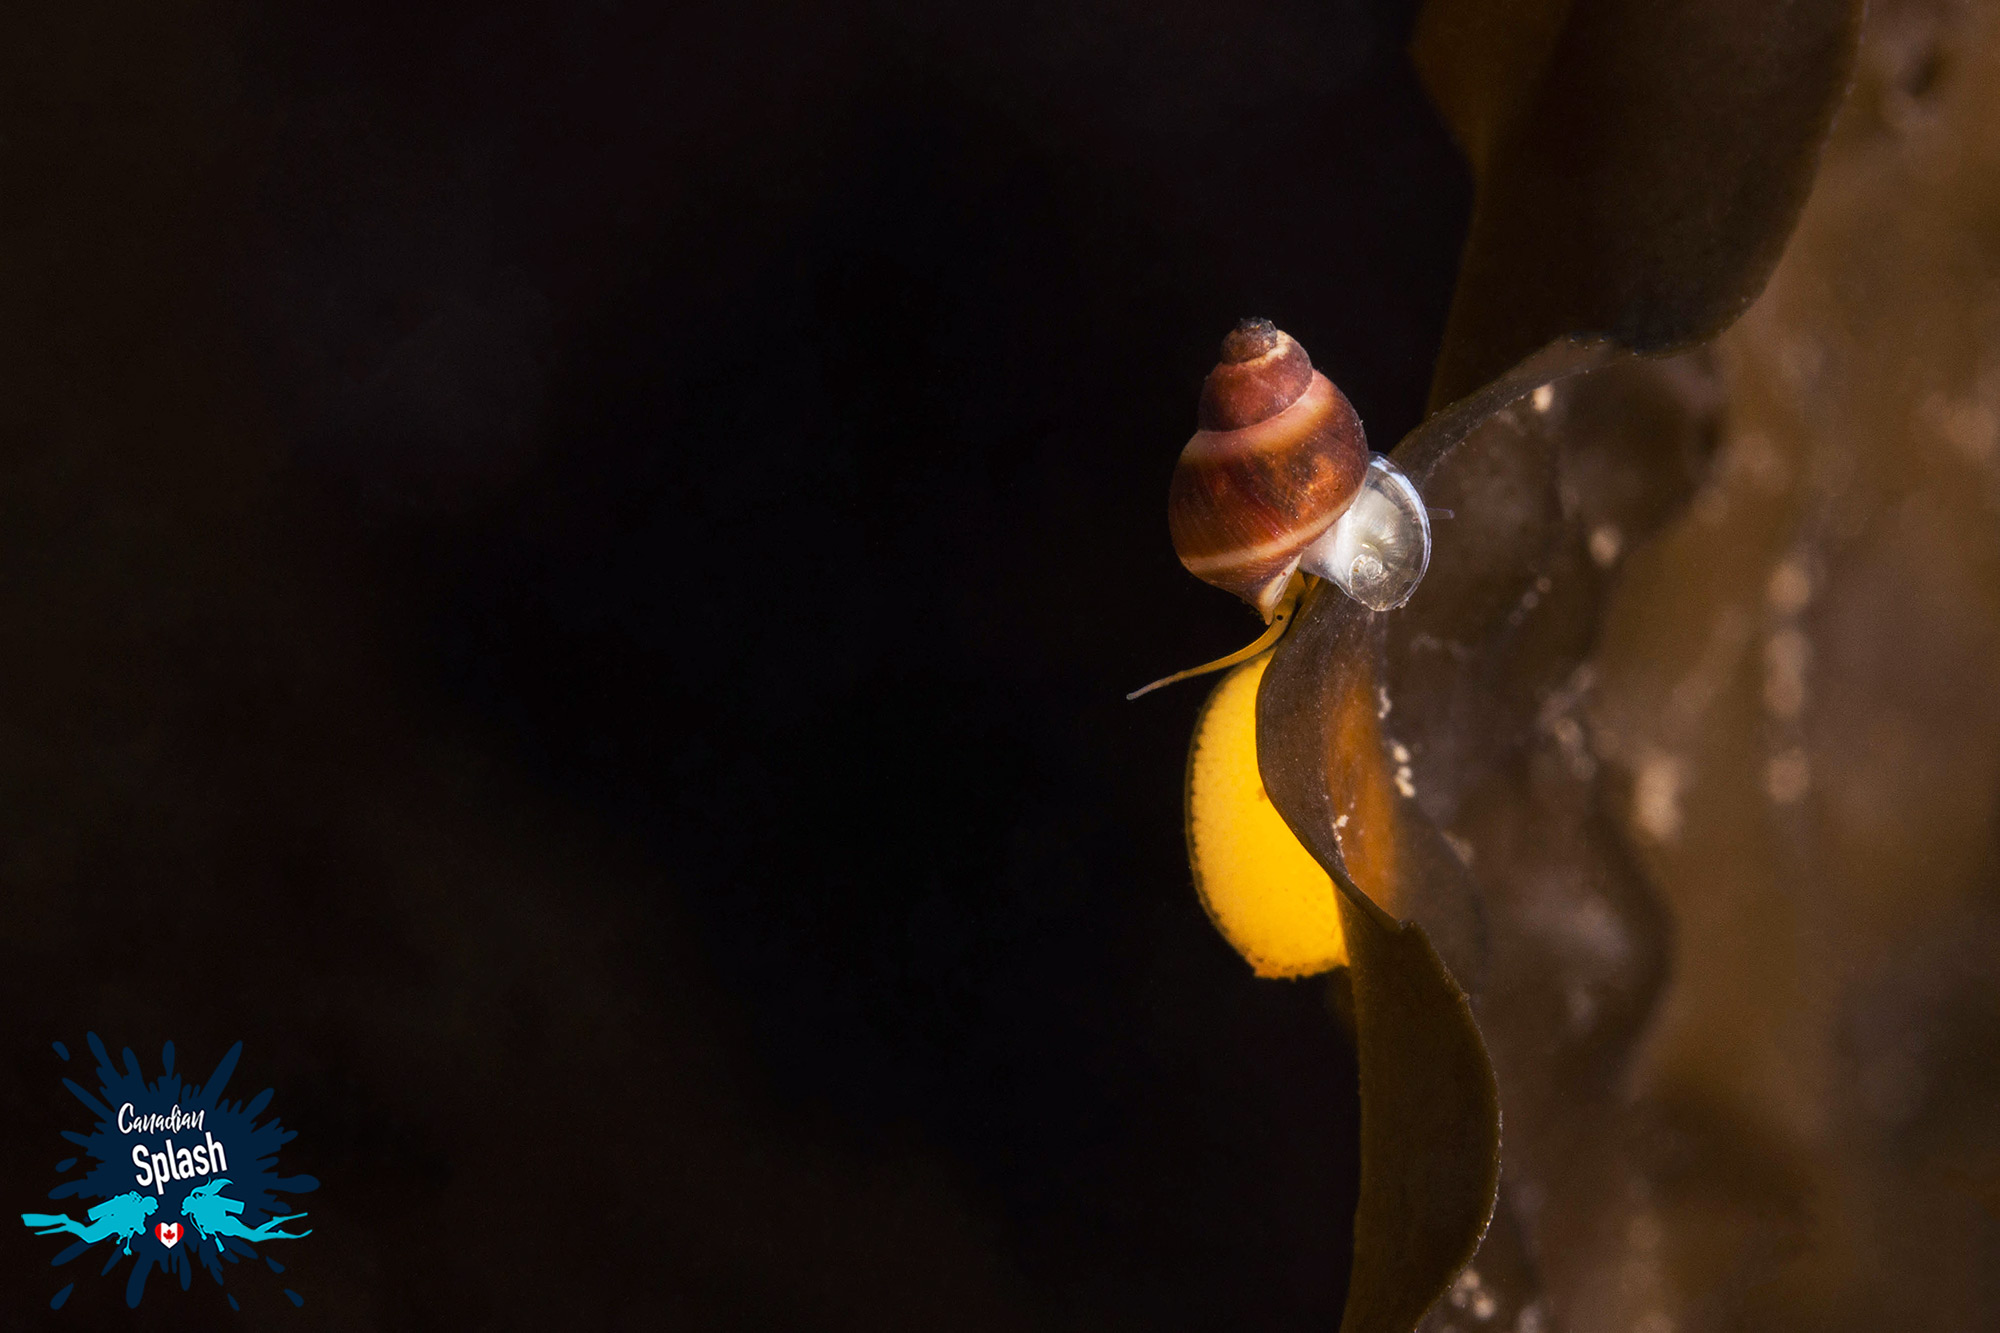 A Small Snail Hanging On At The Edge Of A Piece Of Sugar Kelp Scuba Diving On Grand Manan, New Brunswick